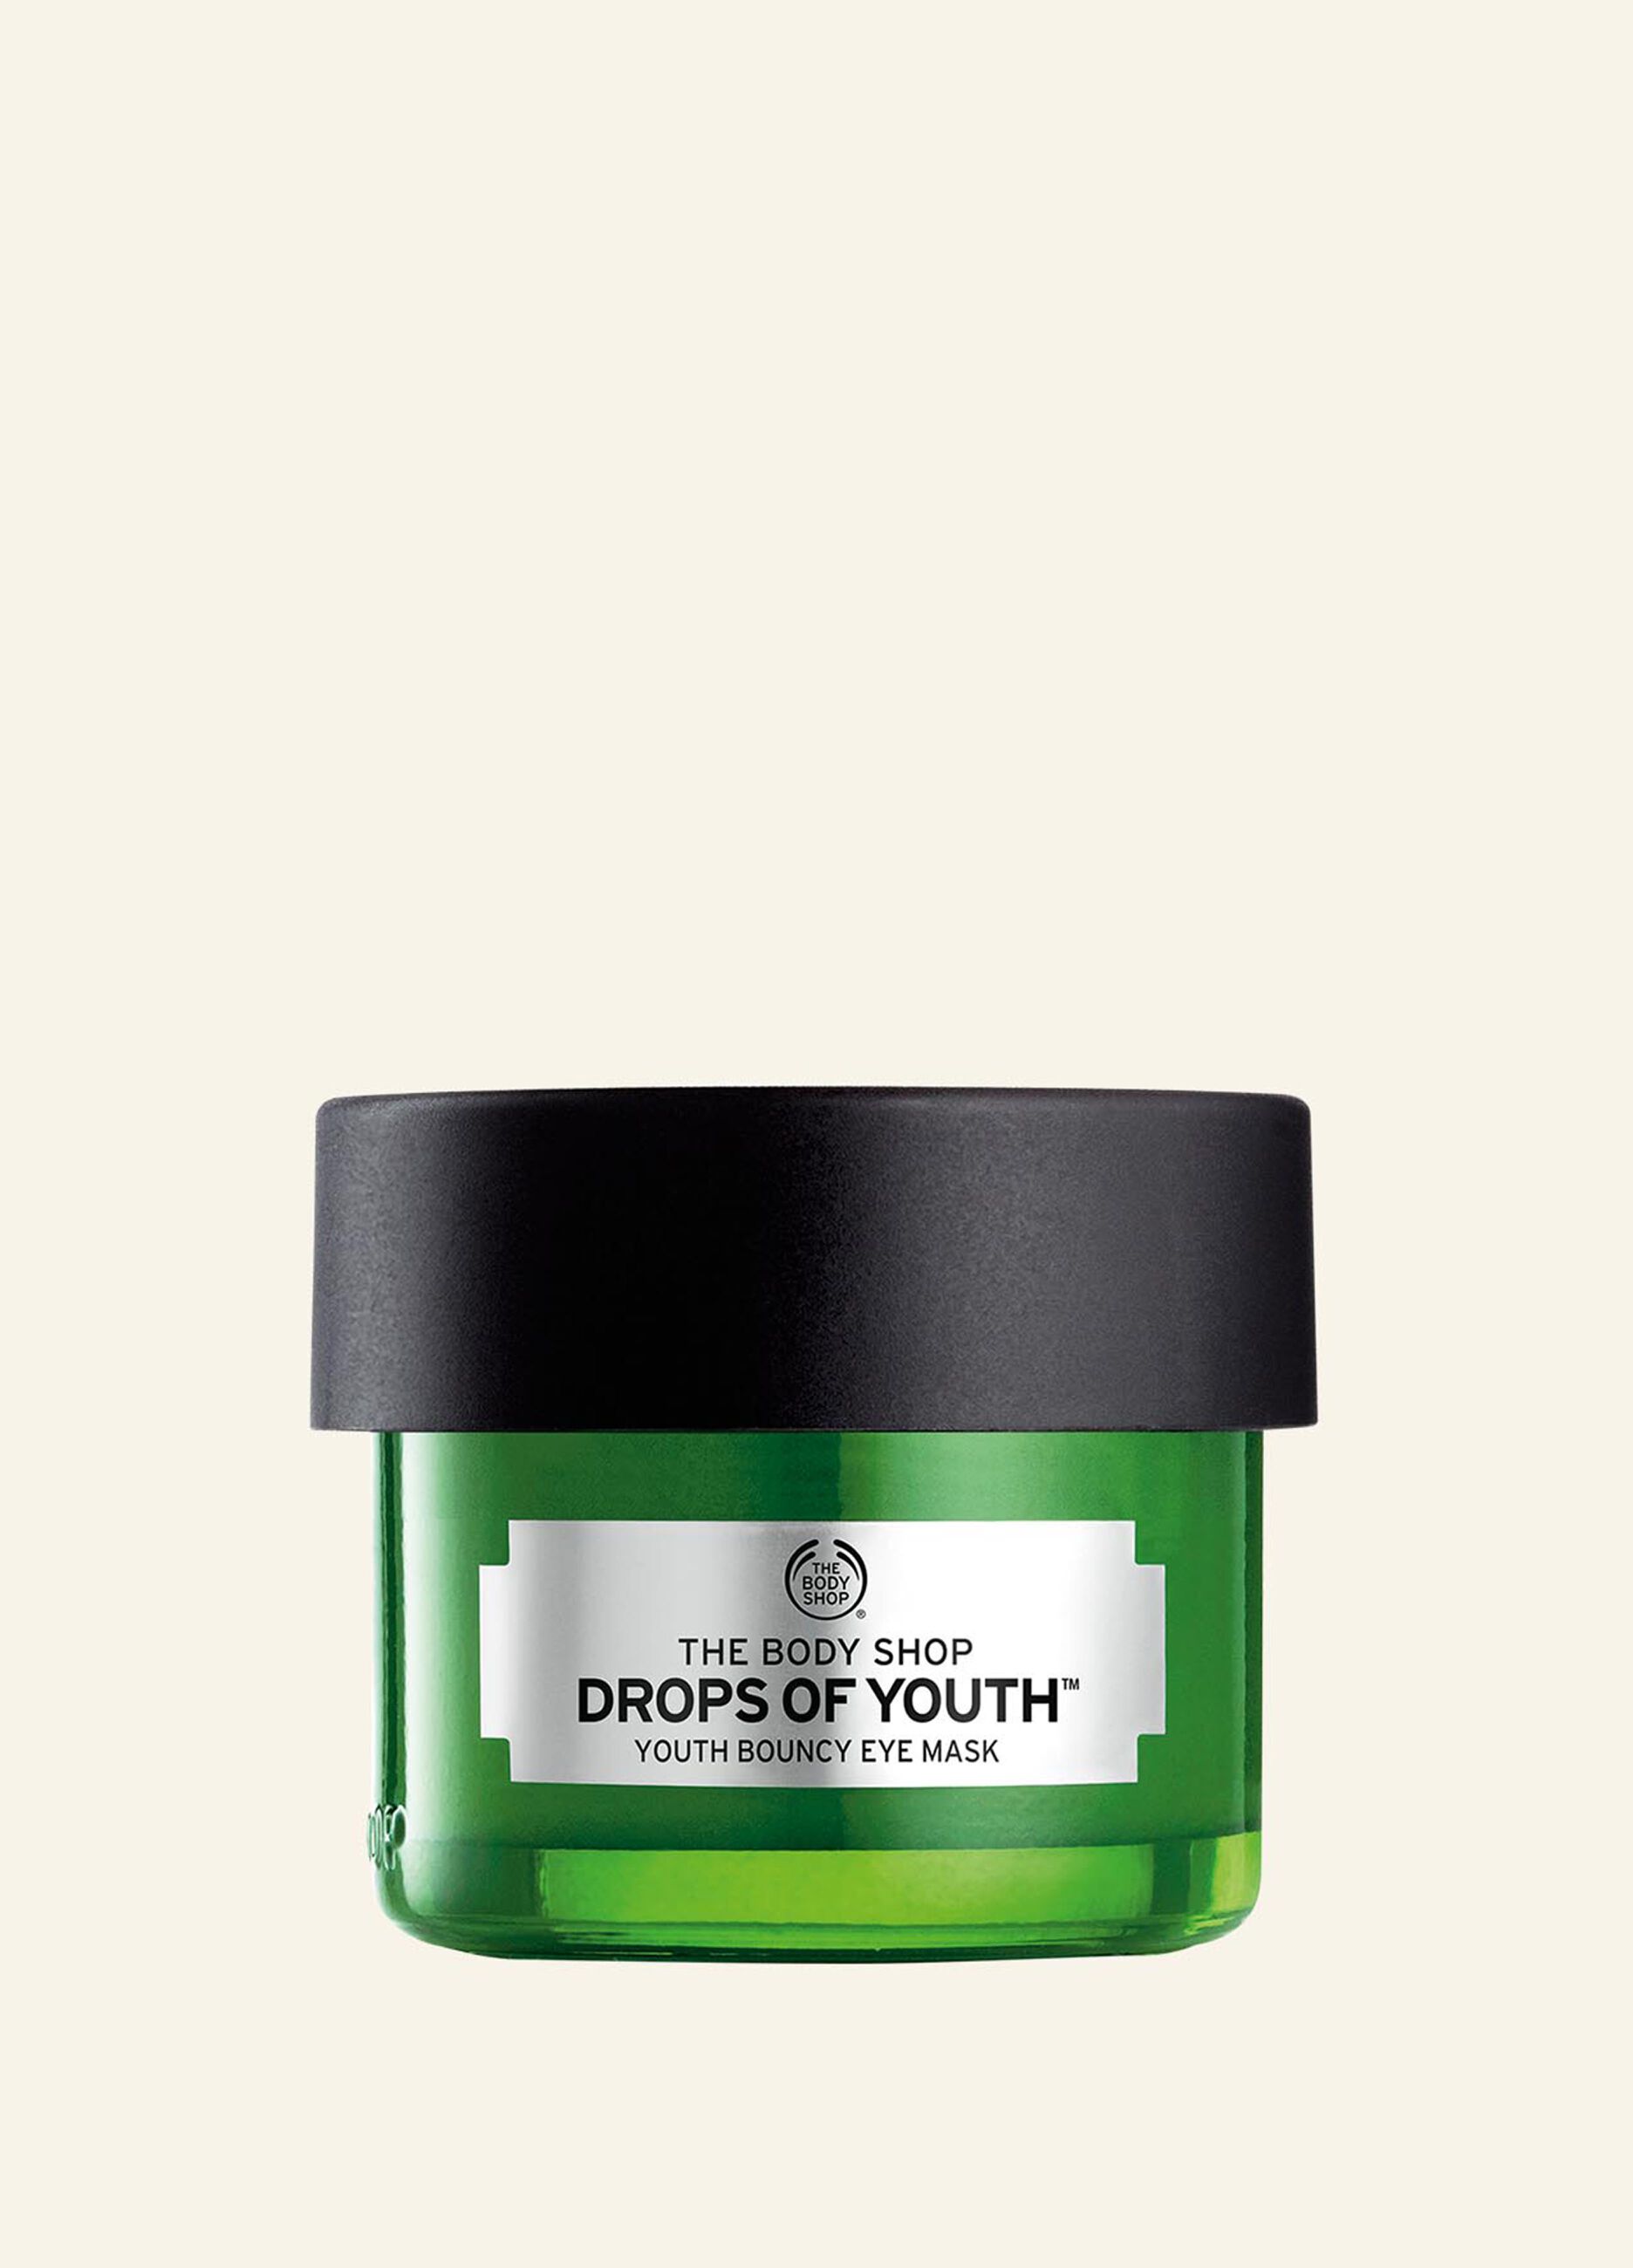 The Body Shop Drops Of Youth™ eye mask